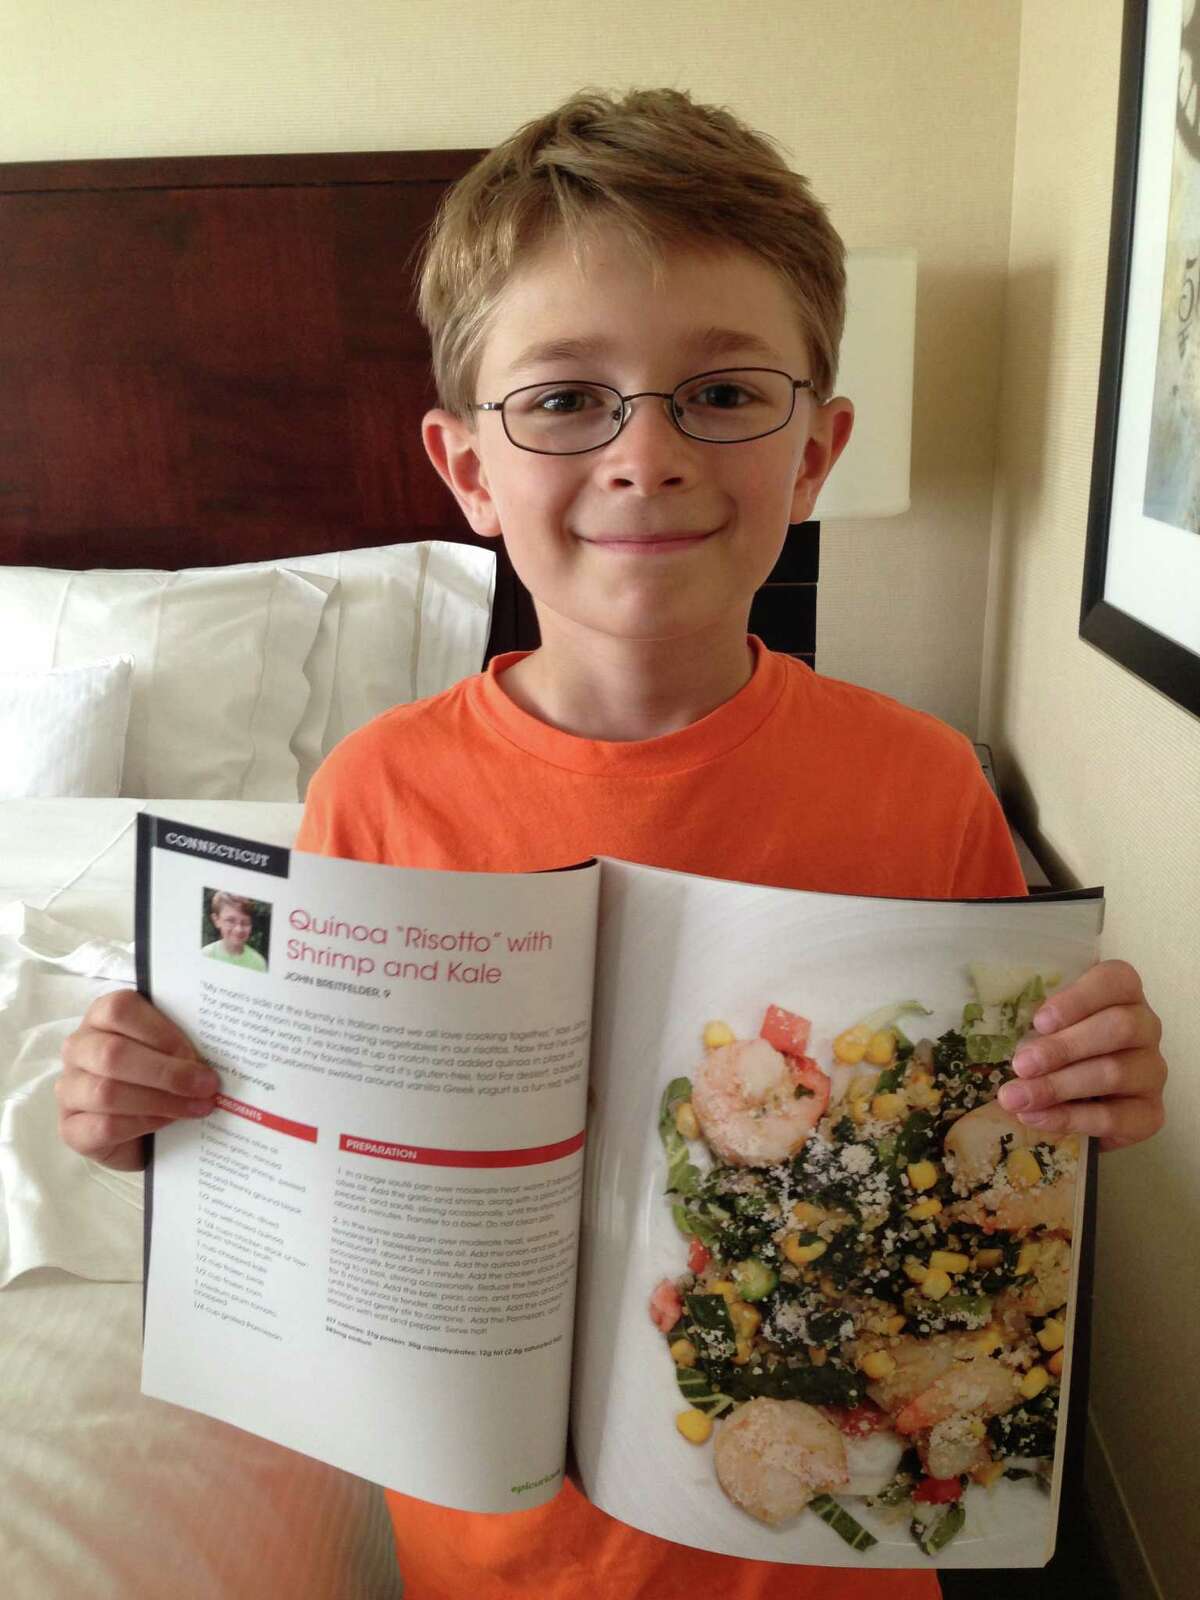 New Canaan's nine-year-old John Breitfelder won the 2013 Healthy Lunchtime Challenge for the state of Conn., a contest created by First Lady Michelle Obama. On Tuesday July 9, he attended the Kids' State Dinner at the White House, at which both Michelle and Barack Obama spoke.